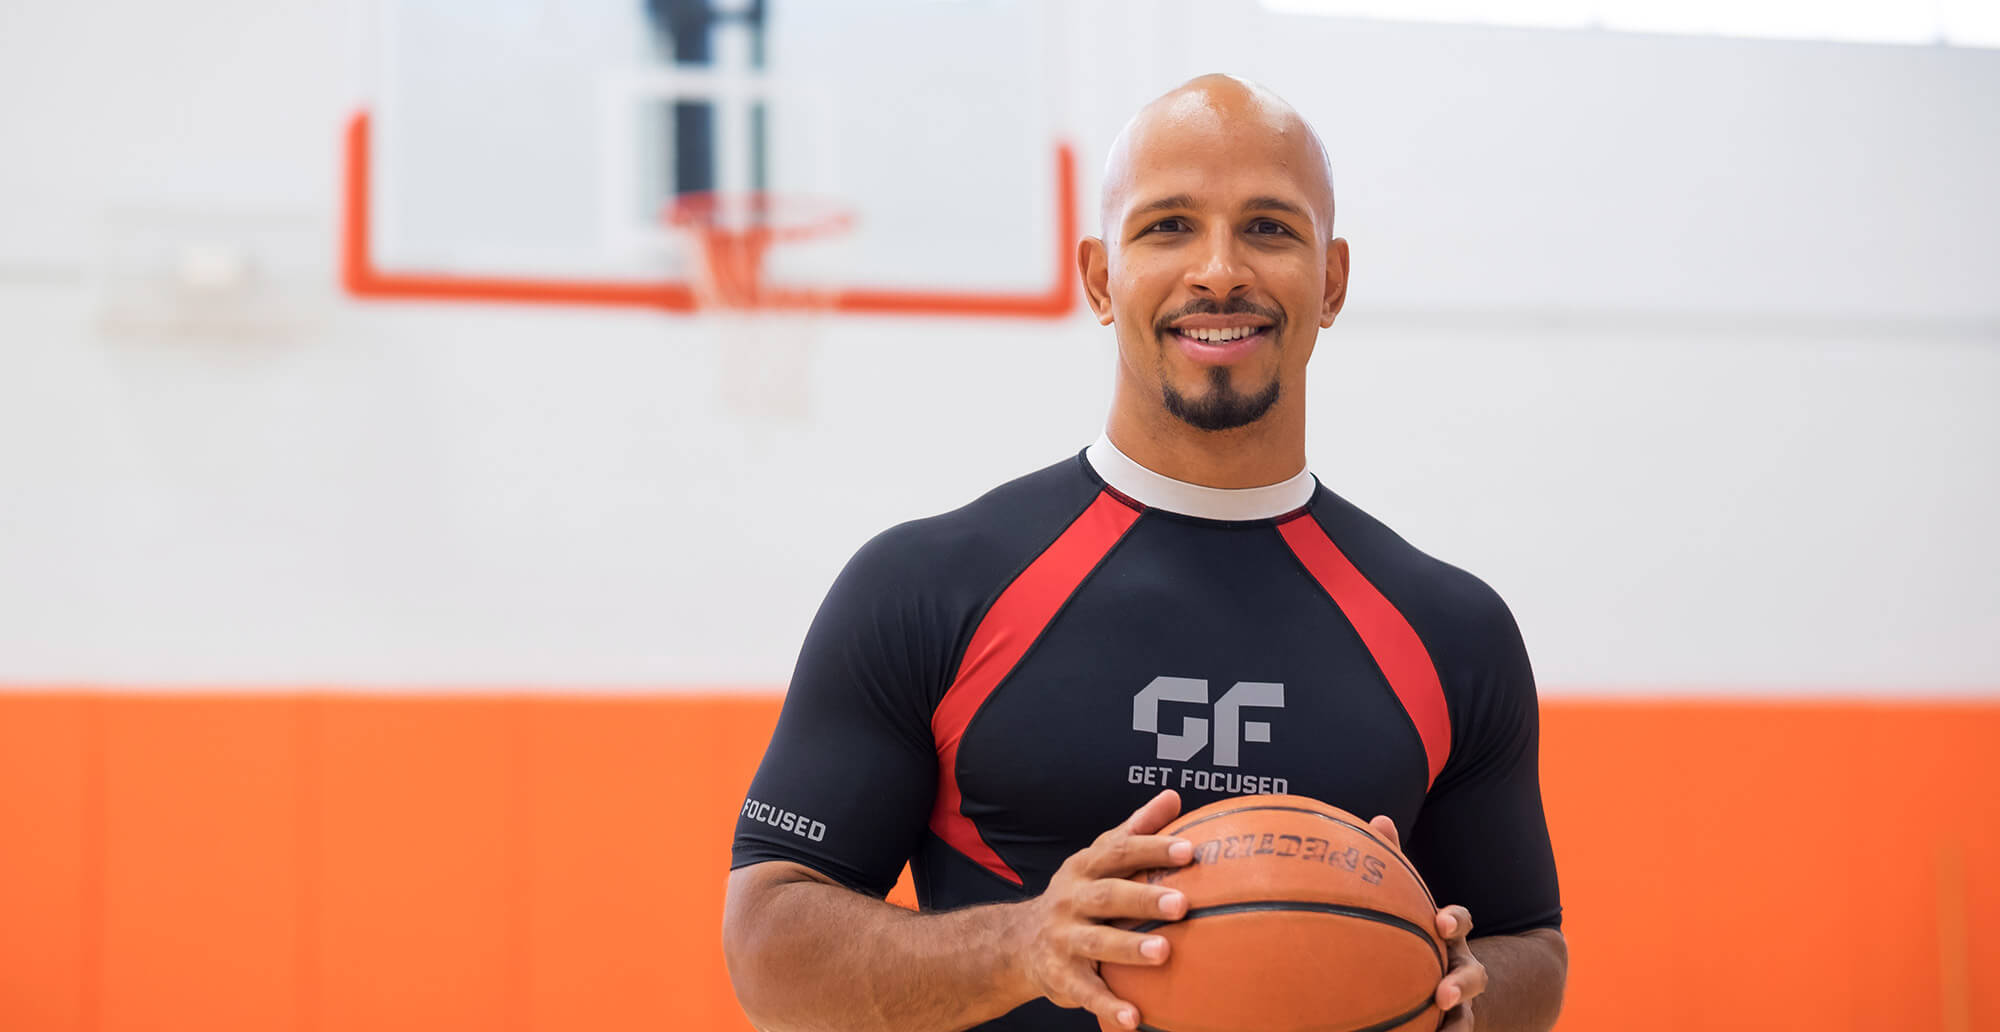 Man smiling and holding basketball